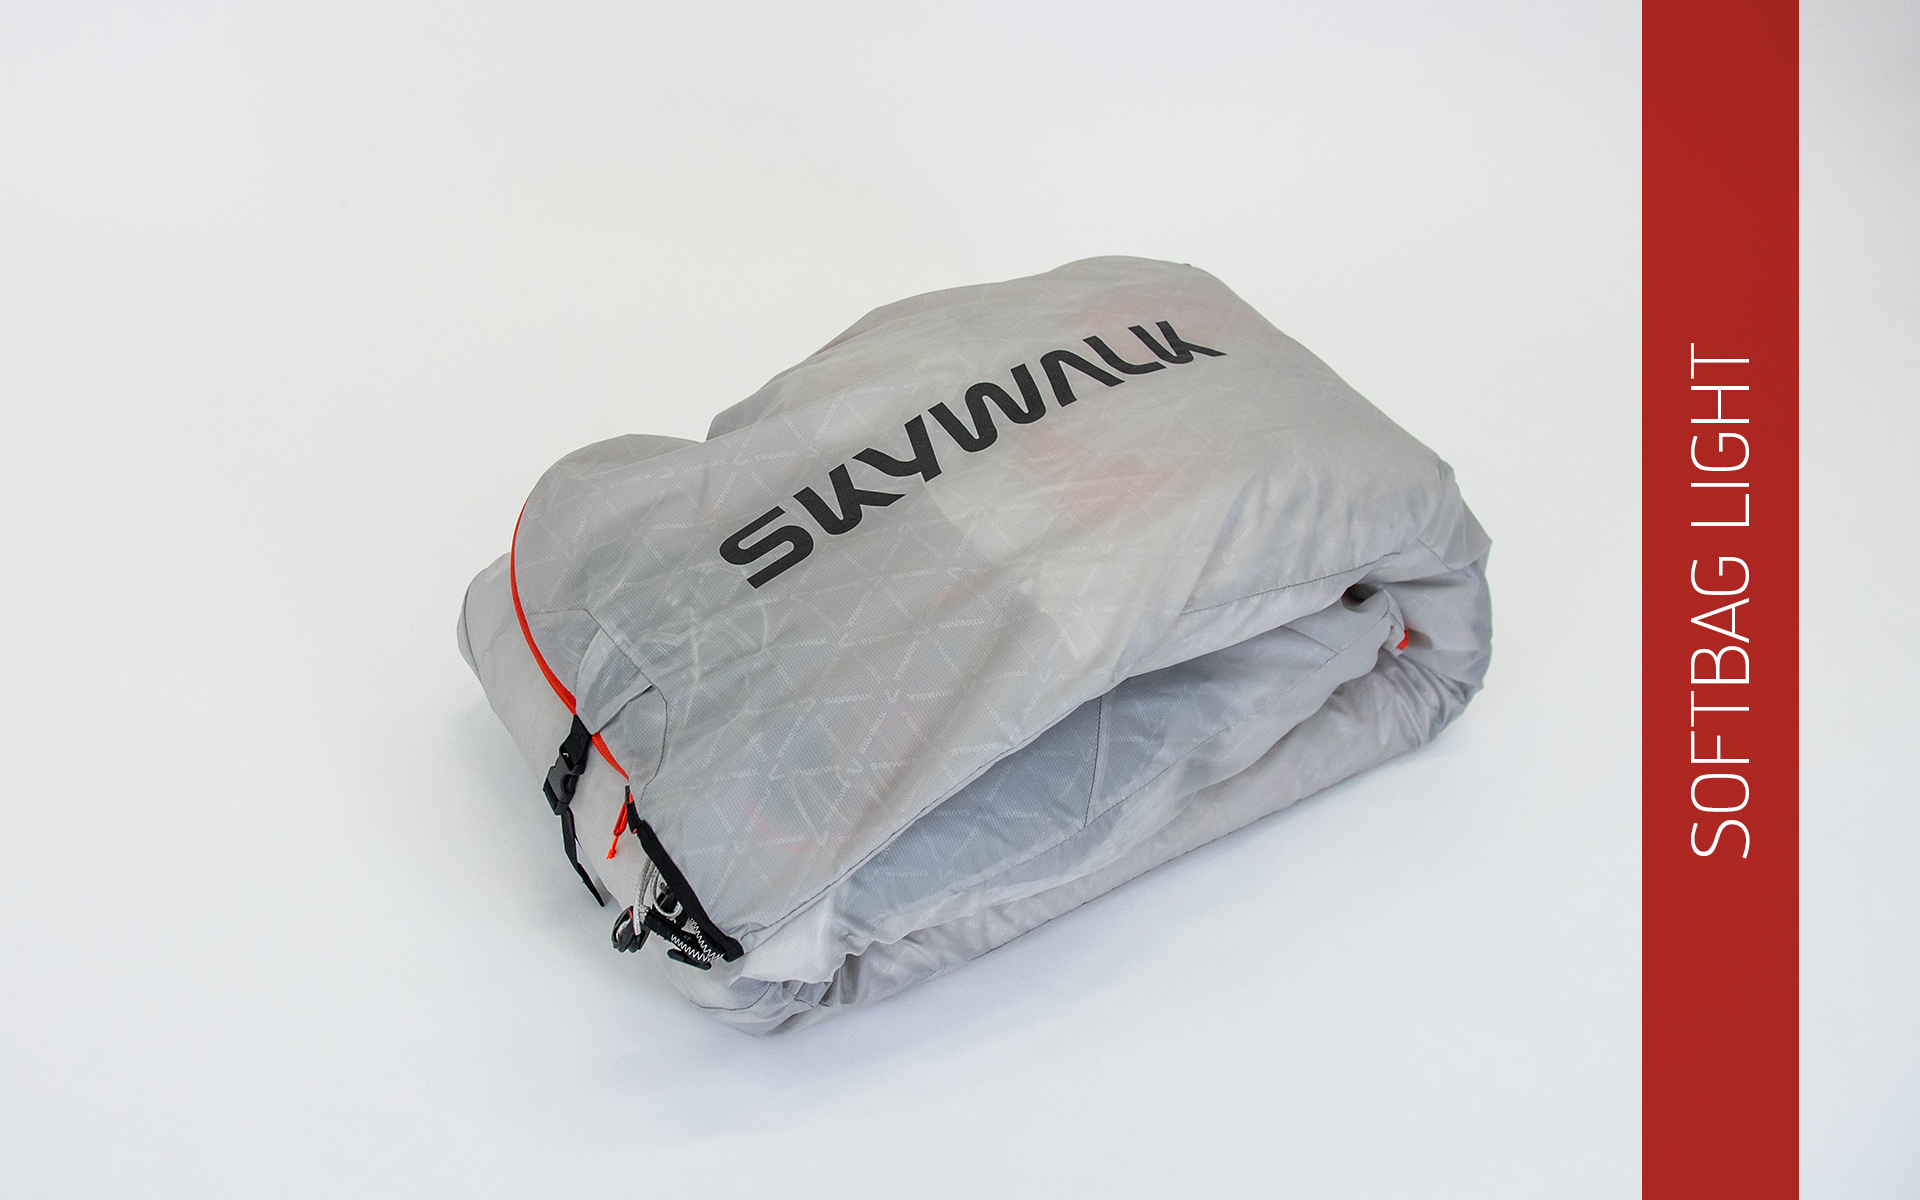 skywalk paragliders - EASY BAG - Available now